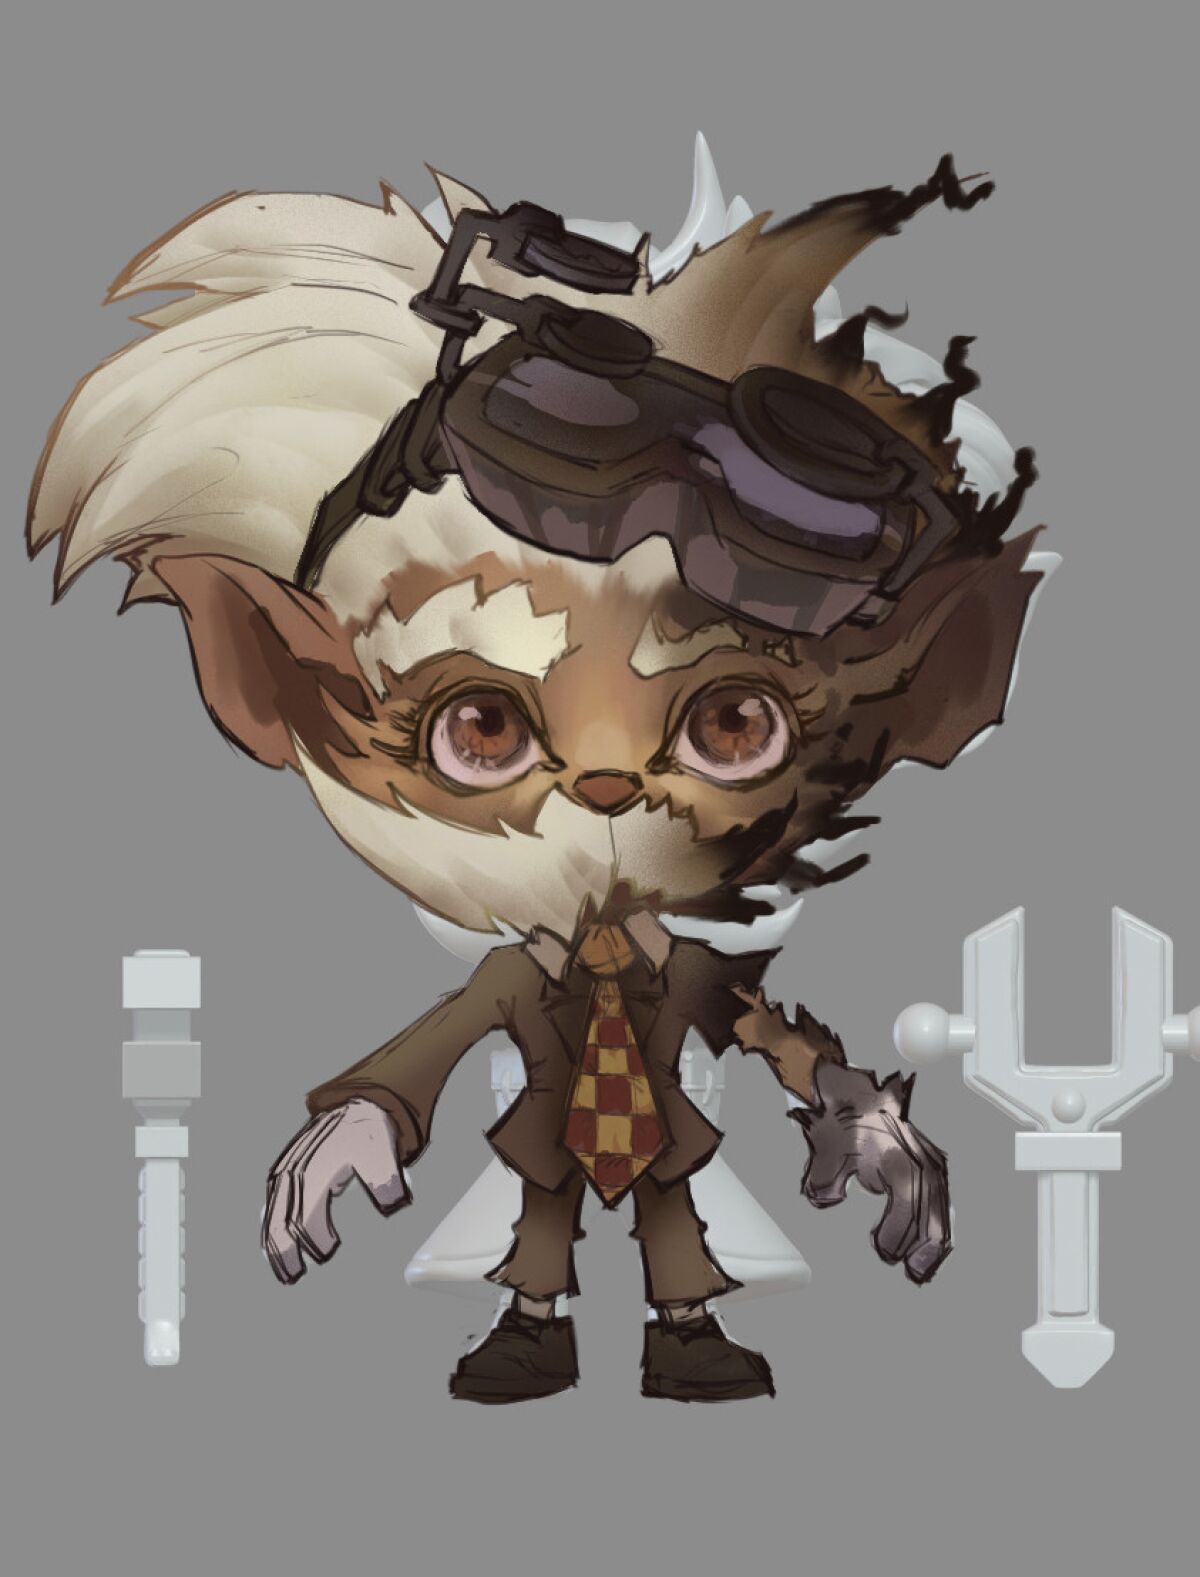 Early concept art shows Heimerdinger, a character in the online battle game "League of Legends" who is known as a "revered inventor." (Riot Games)